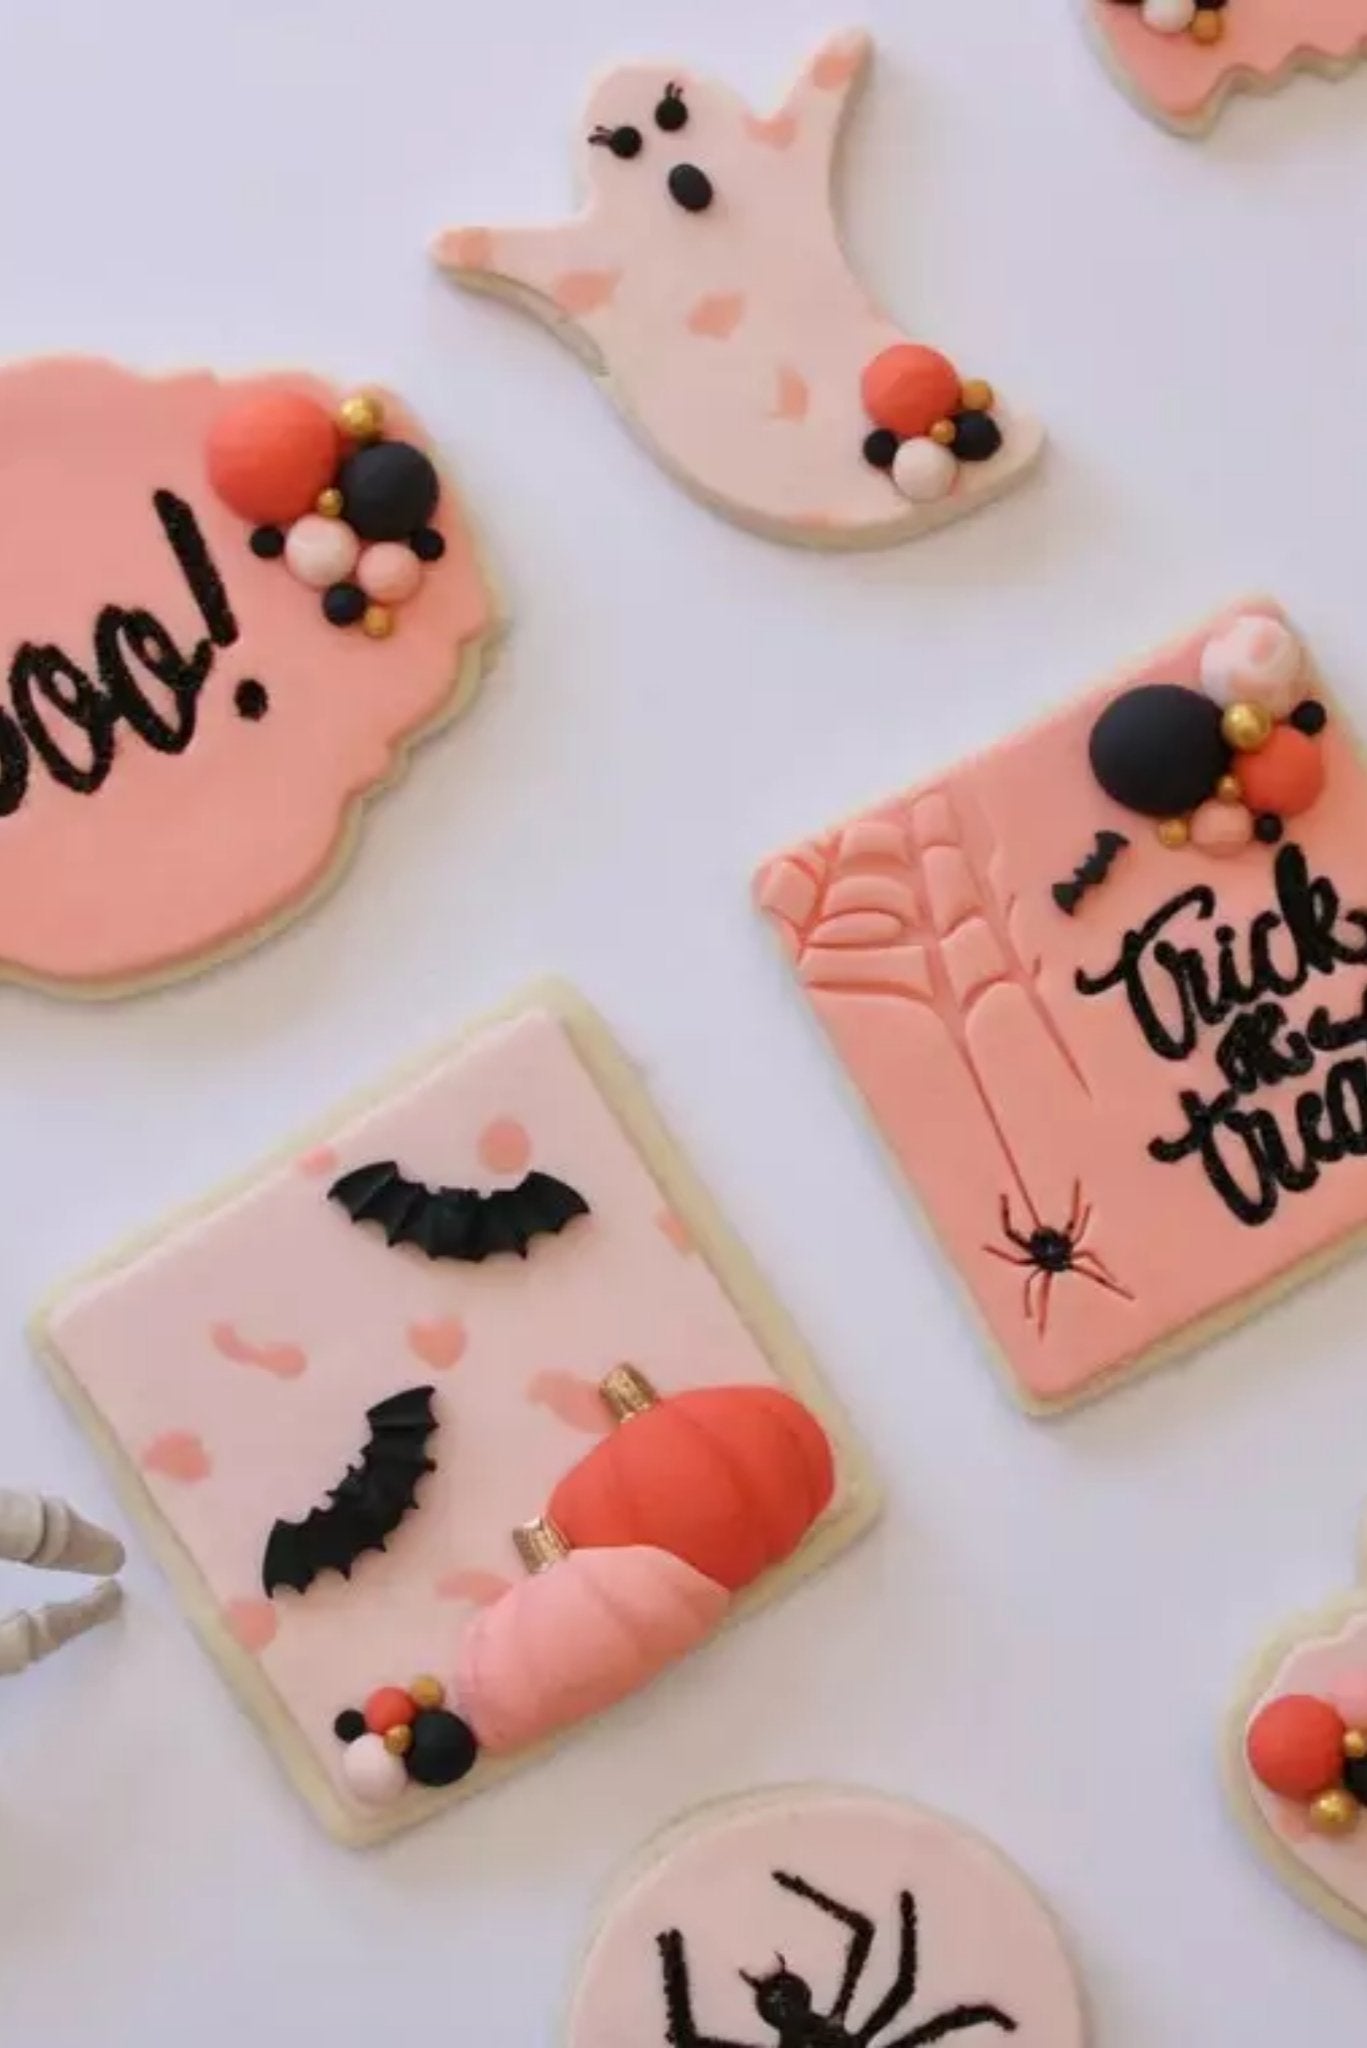 Spooky Halloween Cookies That Look Too Good to Eat - Pretty Collected